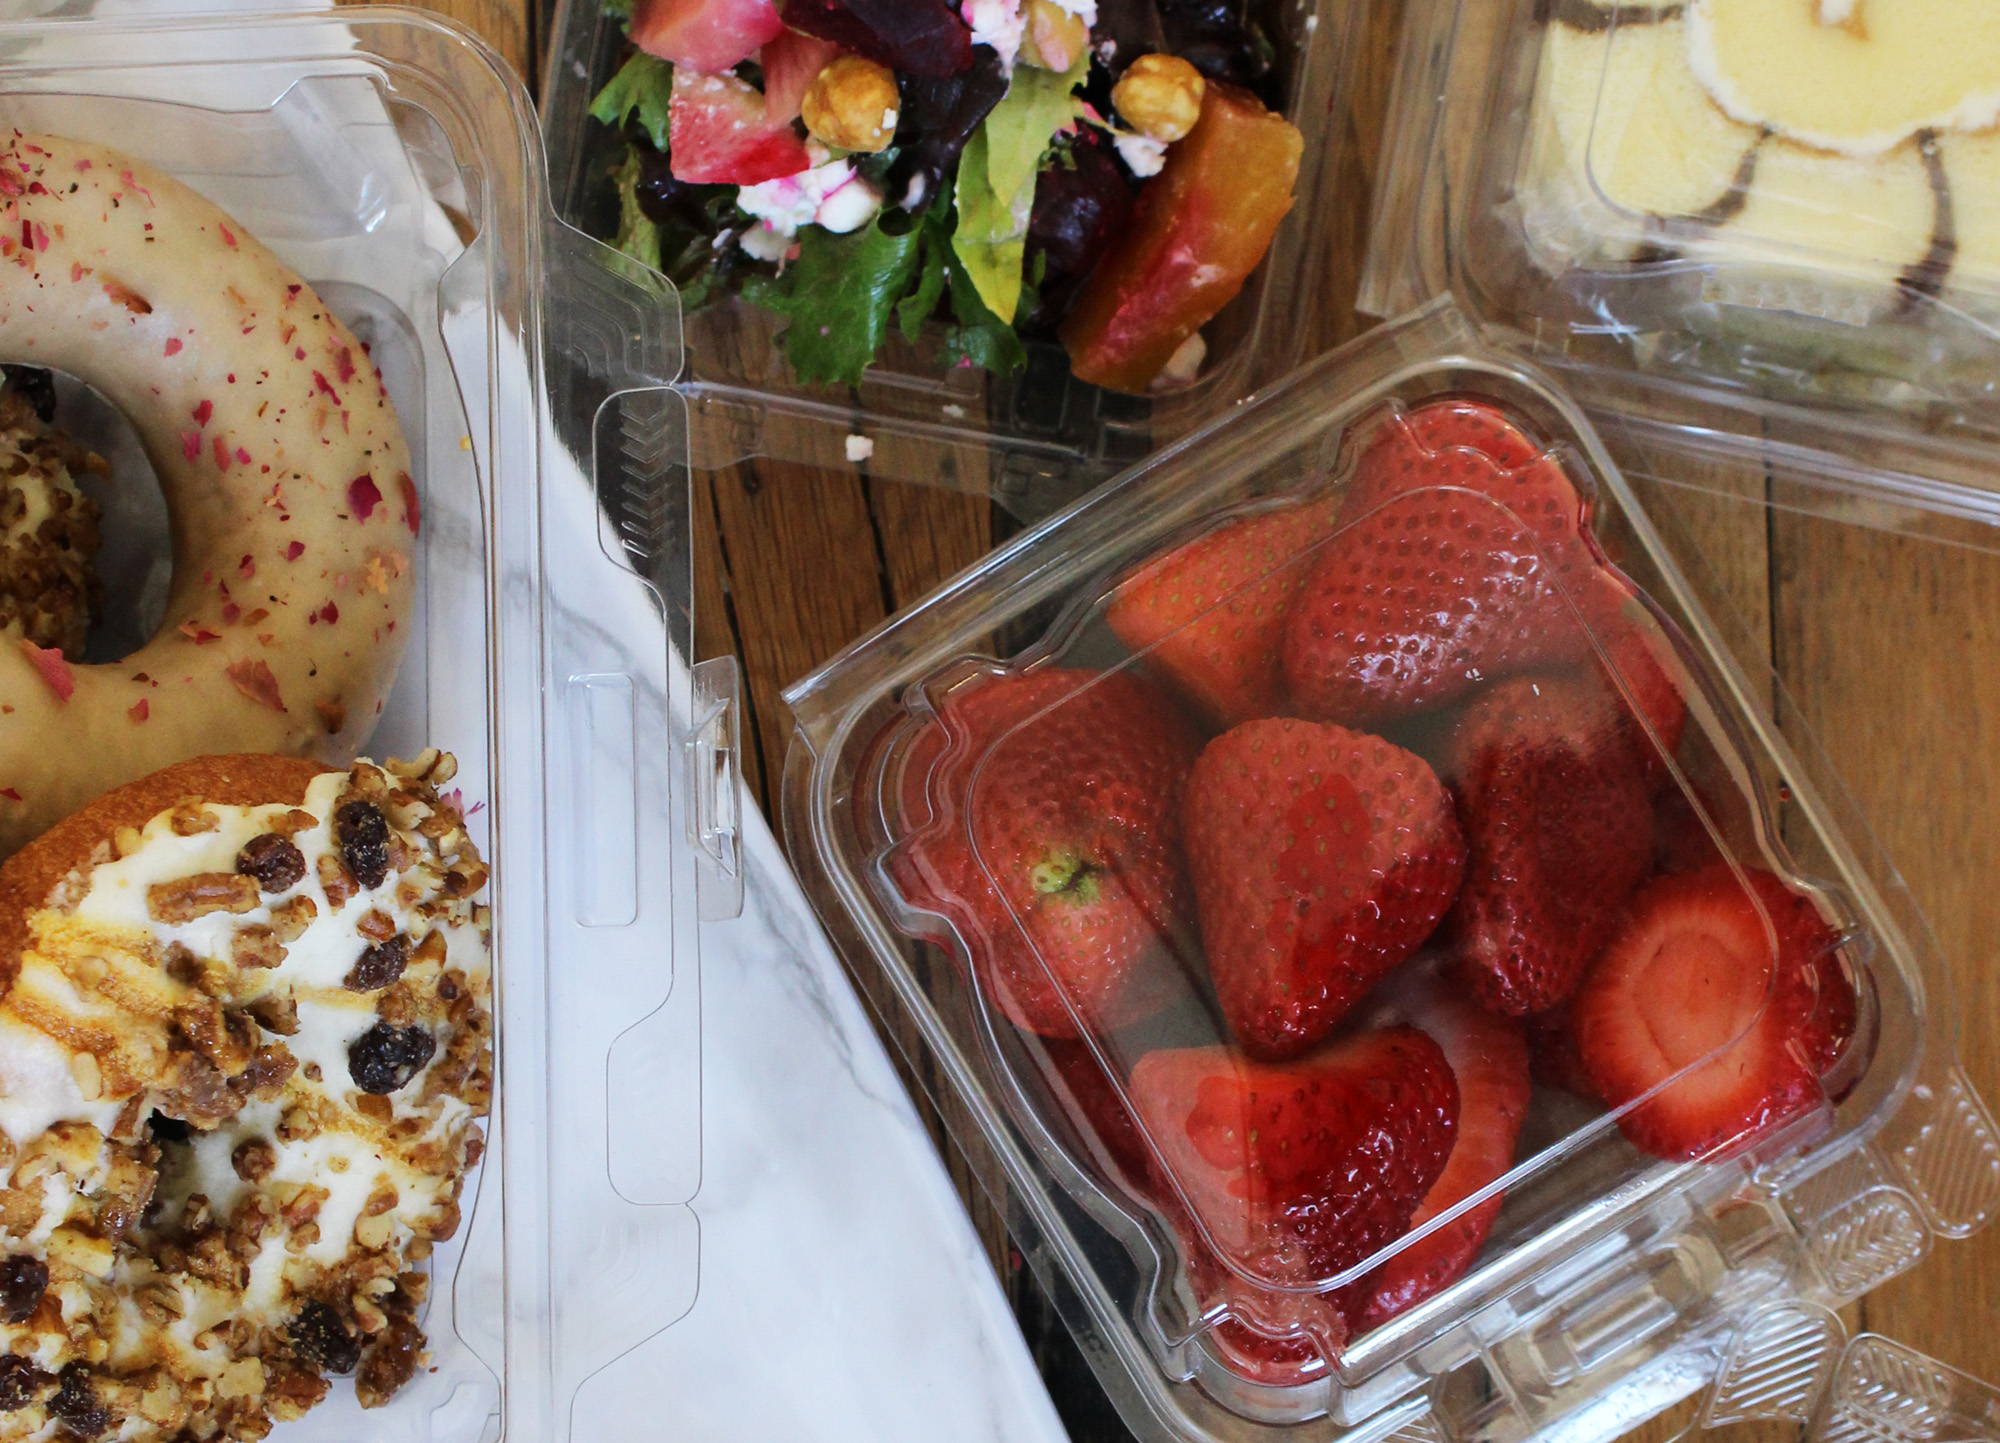 Simply Secure clamshell containers made from biodegradable bioplastic, fulled with strawberries, salad, and doughnuts